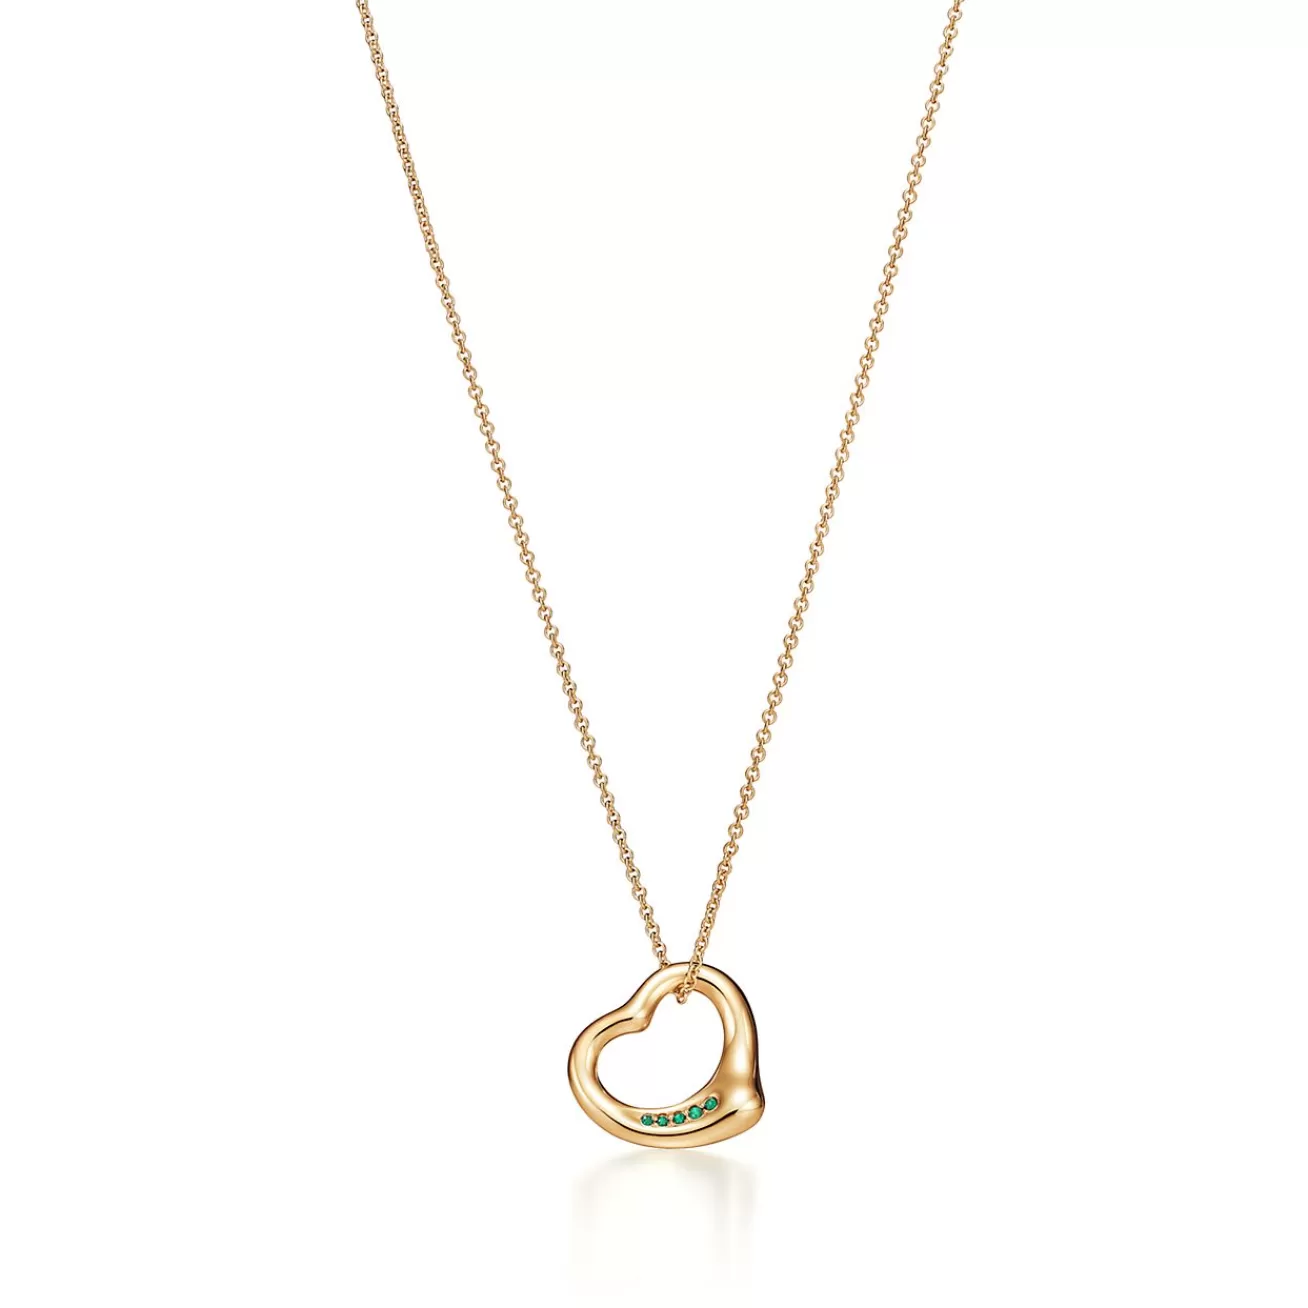 Tiffany & Co. Elsa Peretti® Open Heart Pendant in Yellow Gold with Emeralds, 16 mm | ^ Necklaces & Pendants | Gold Jewelry